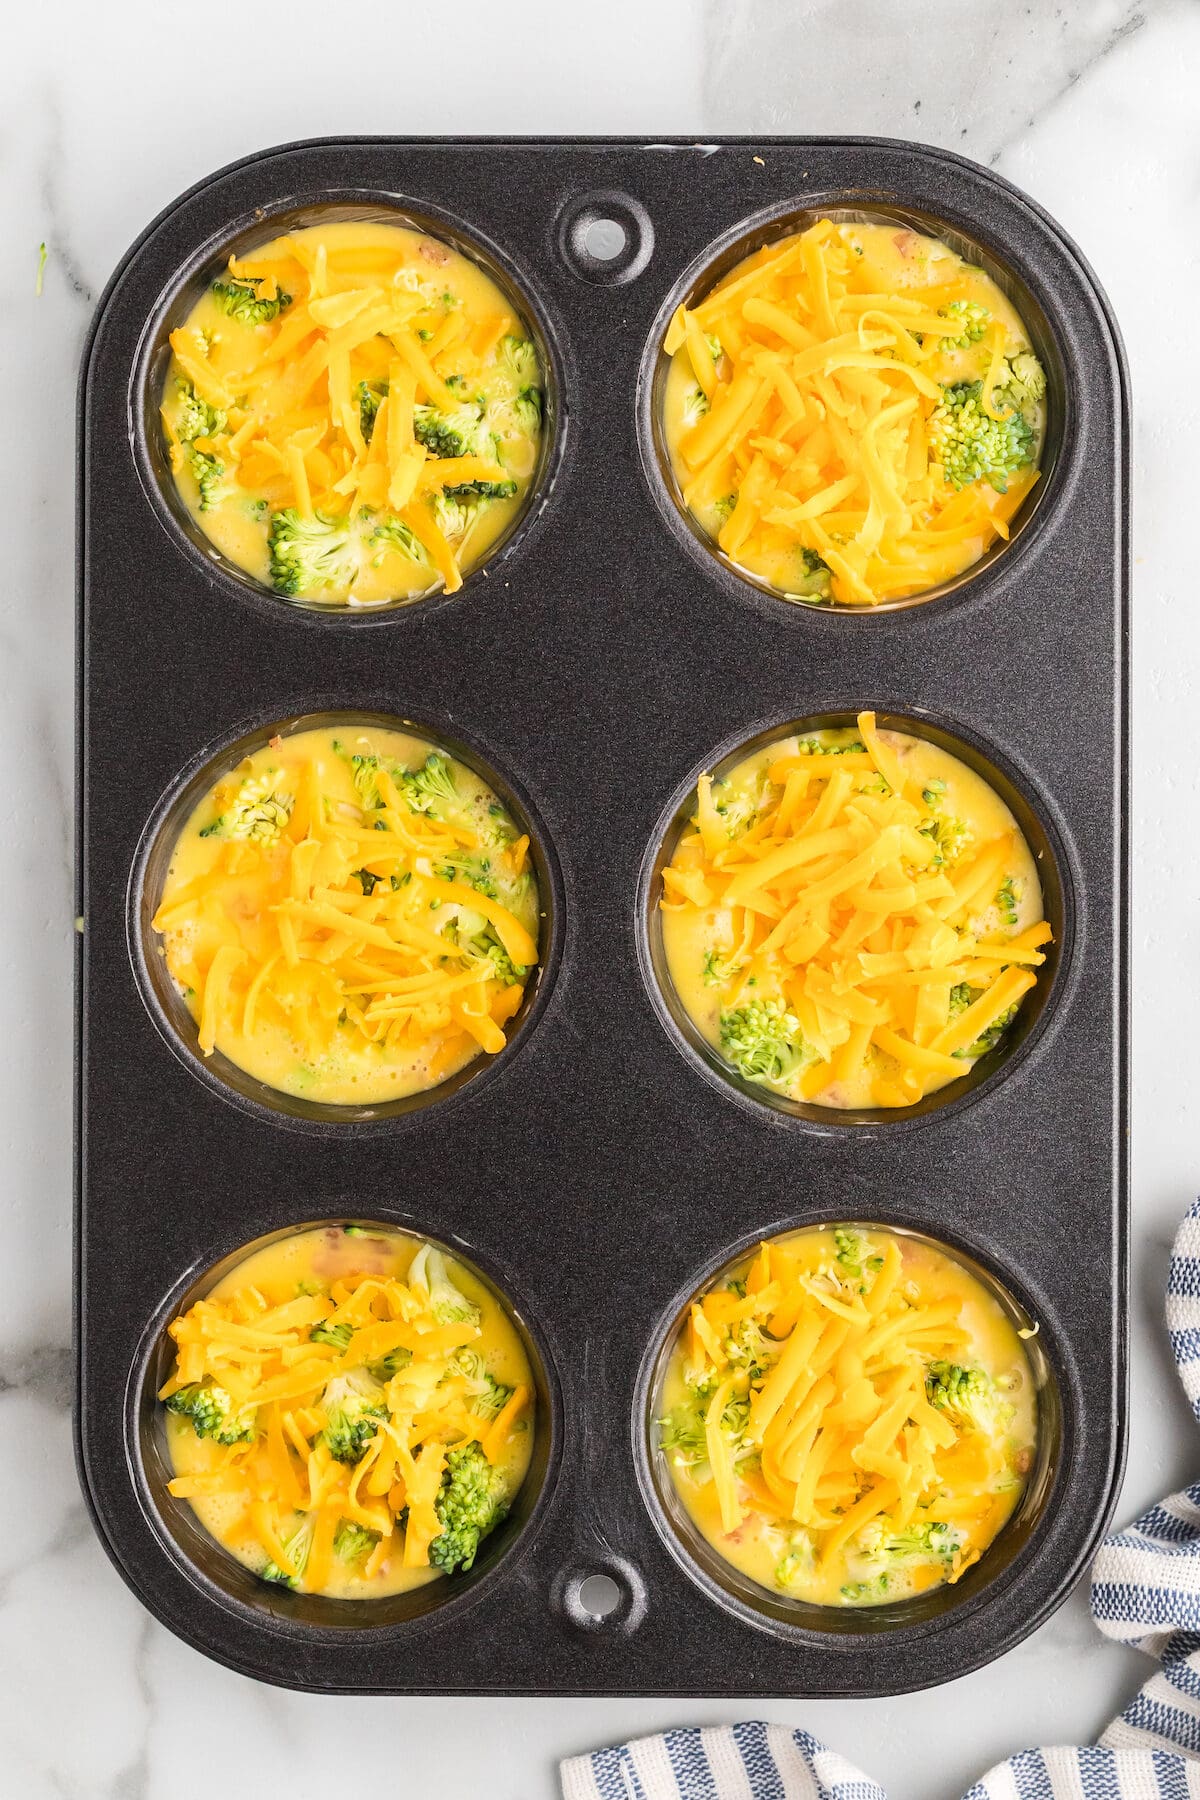 shredded cheddar cheese on the top of the broccoli in the egg muffin cups.